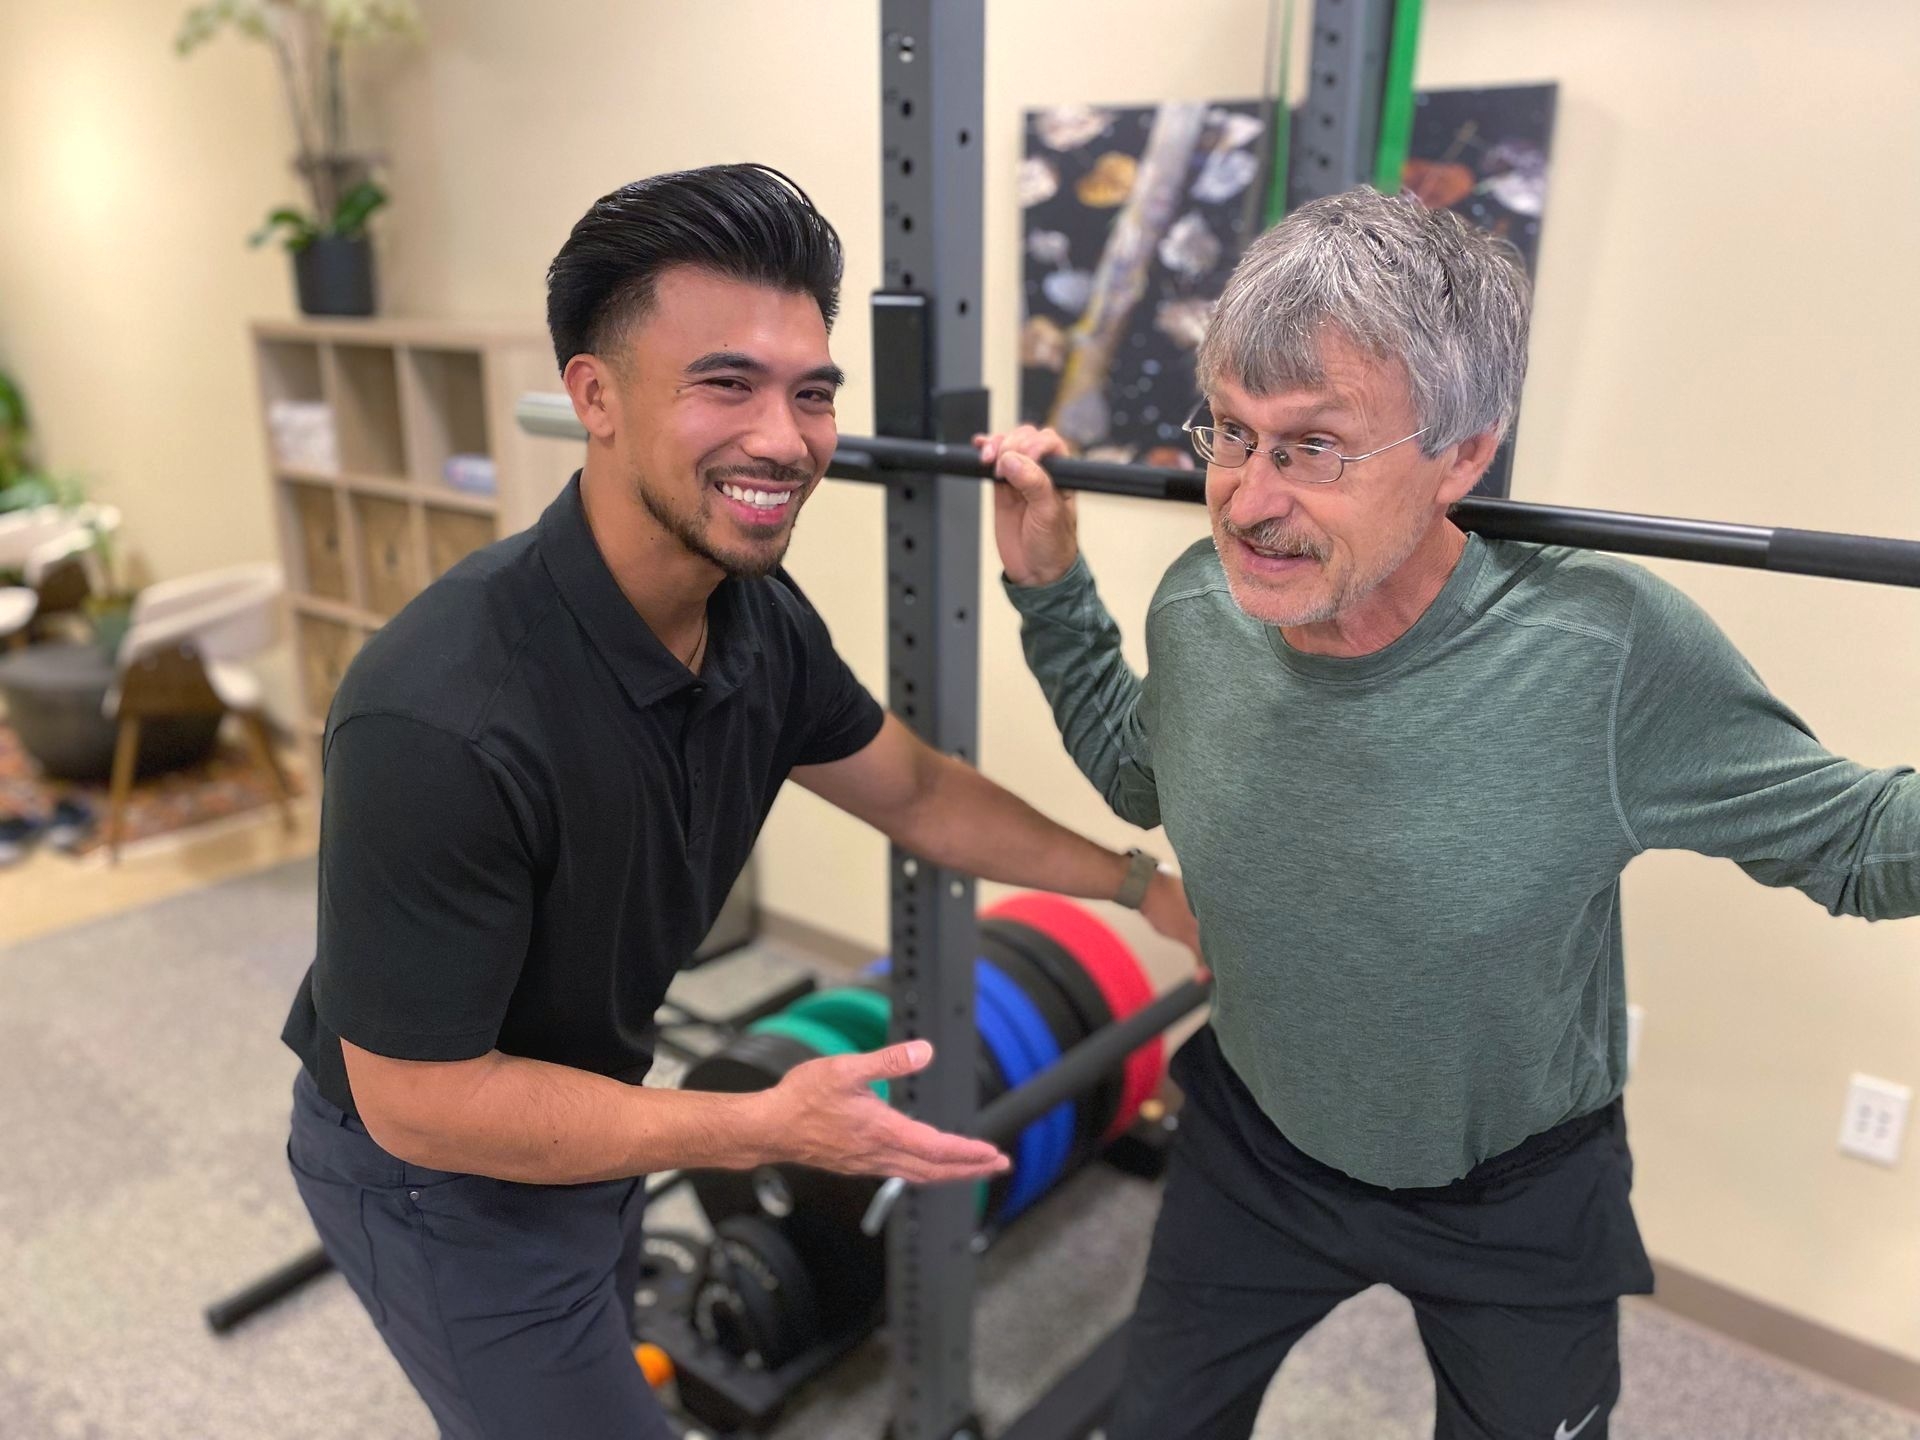 How does aquatic physical therapy help individuals with spinal cord injuries regain functional independence?